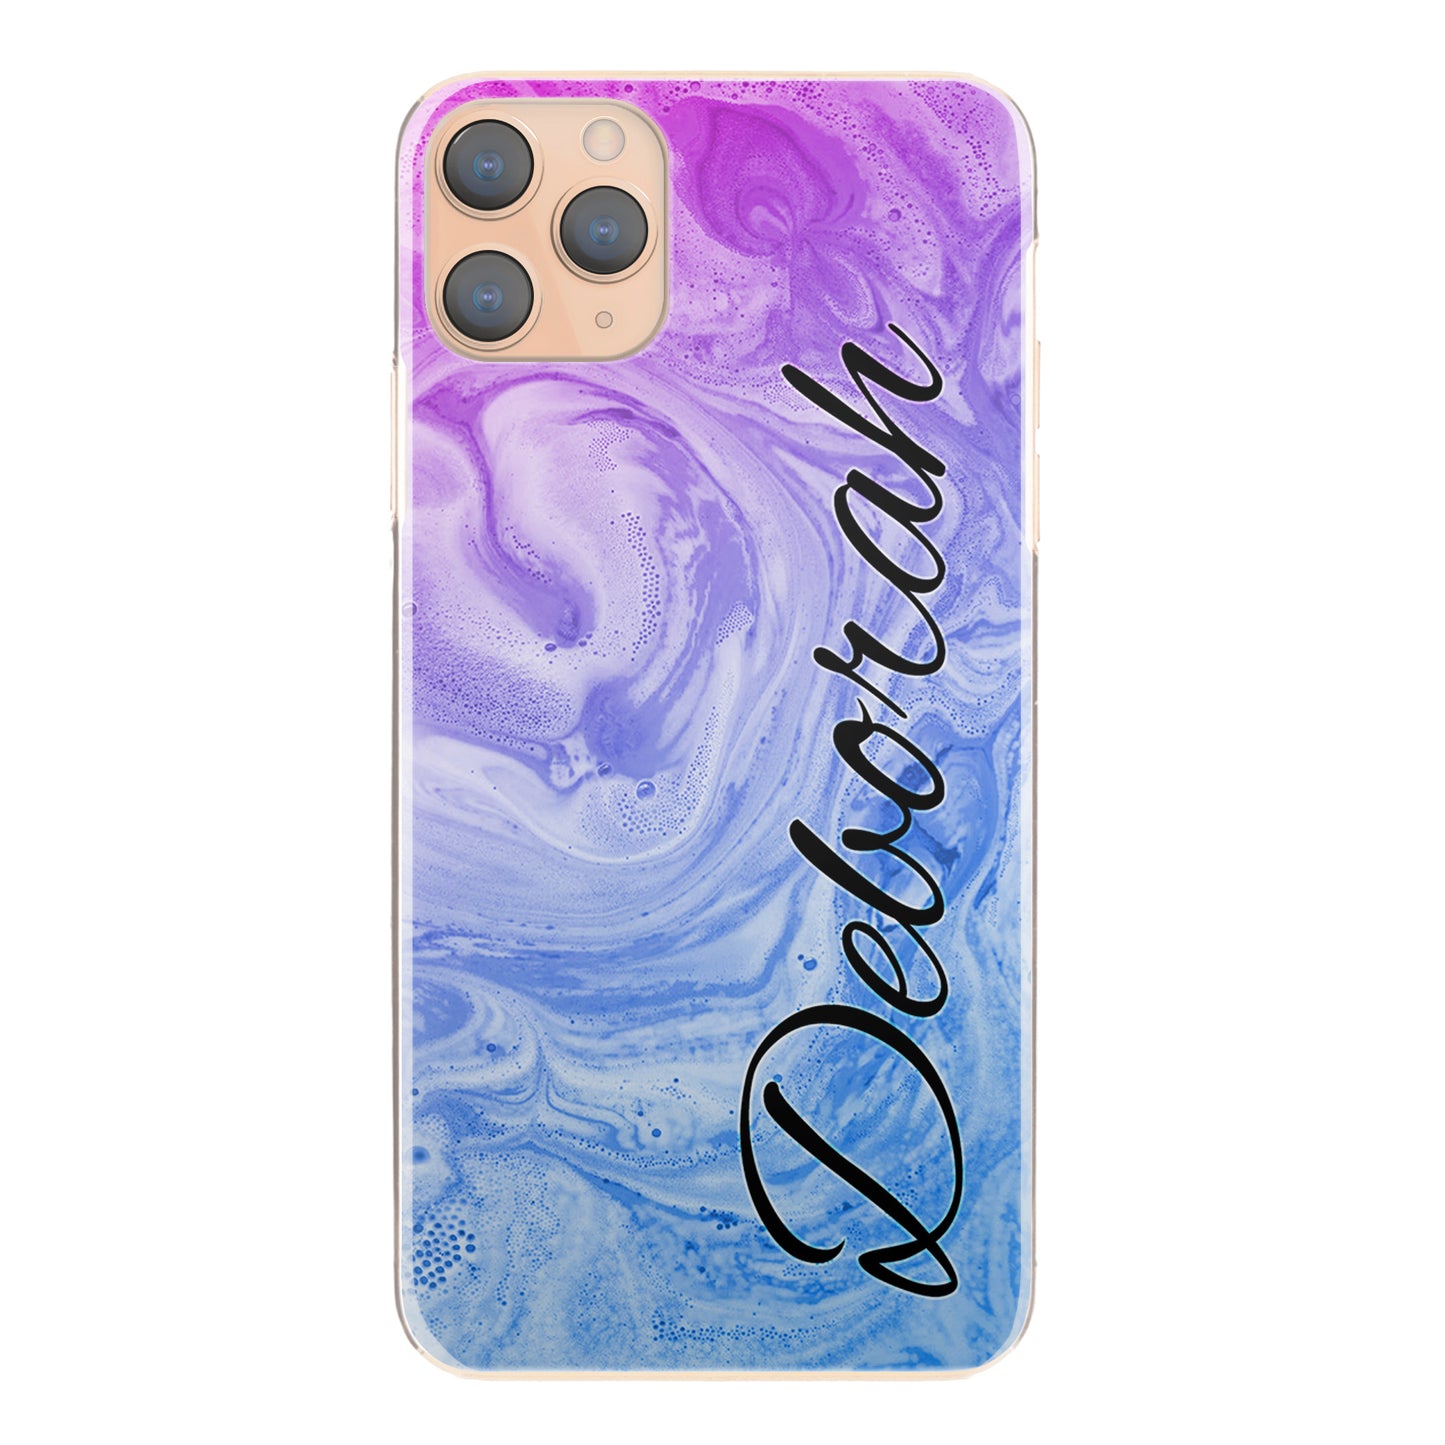 Personalised Sony Phone Hard Case with Stylish Text on Blue Purple Gradient Swirled Marble